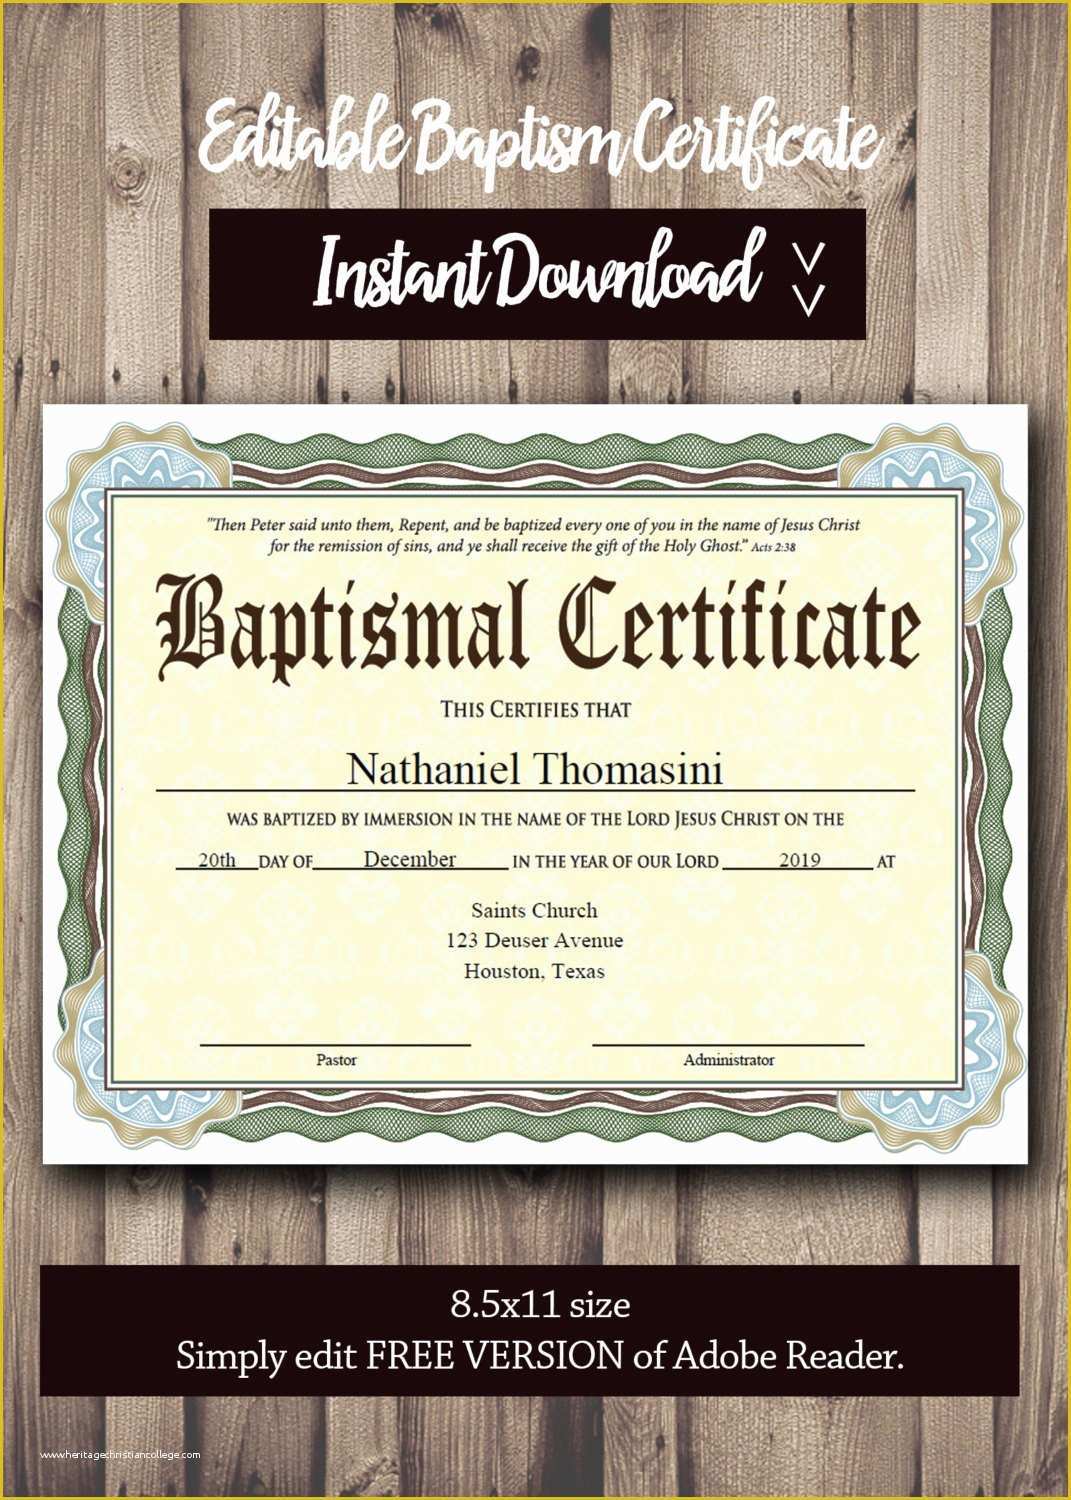 Will You Be My Godmother Free Template Of Baptism Certificate Template Pdf Adobe Reader Editable File